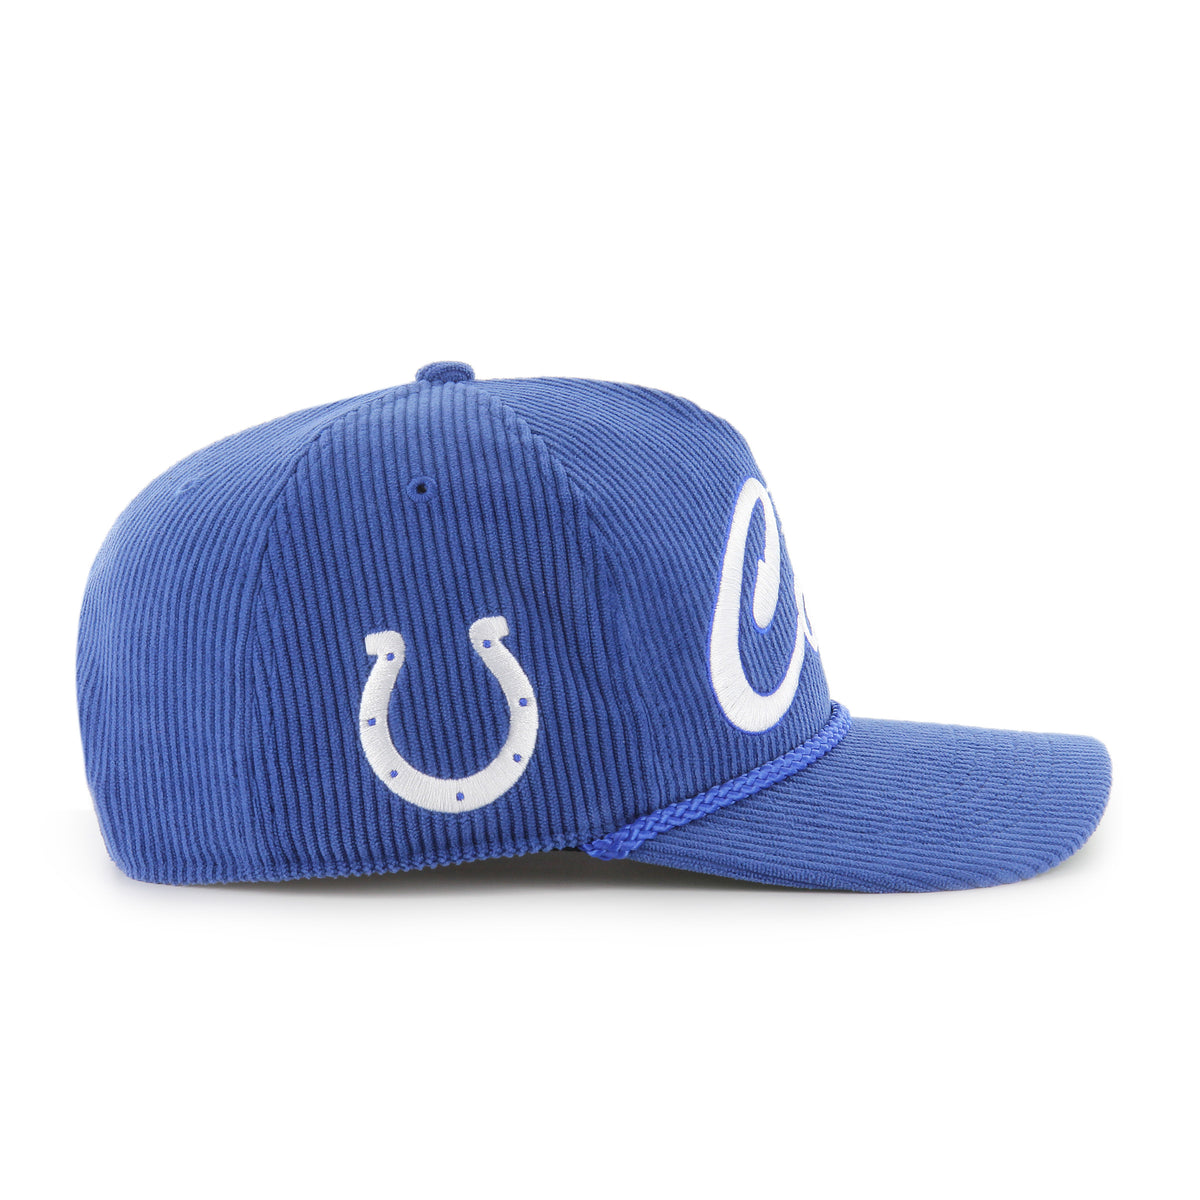 INDIANAPOLIS COLTS GRIDIRON '47 HITCH RELAXED FIT